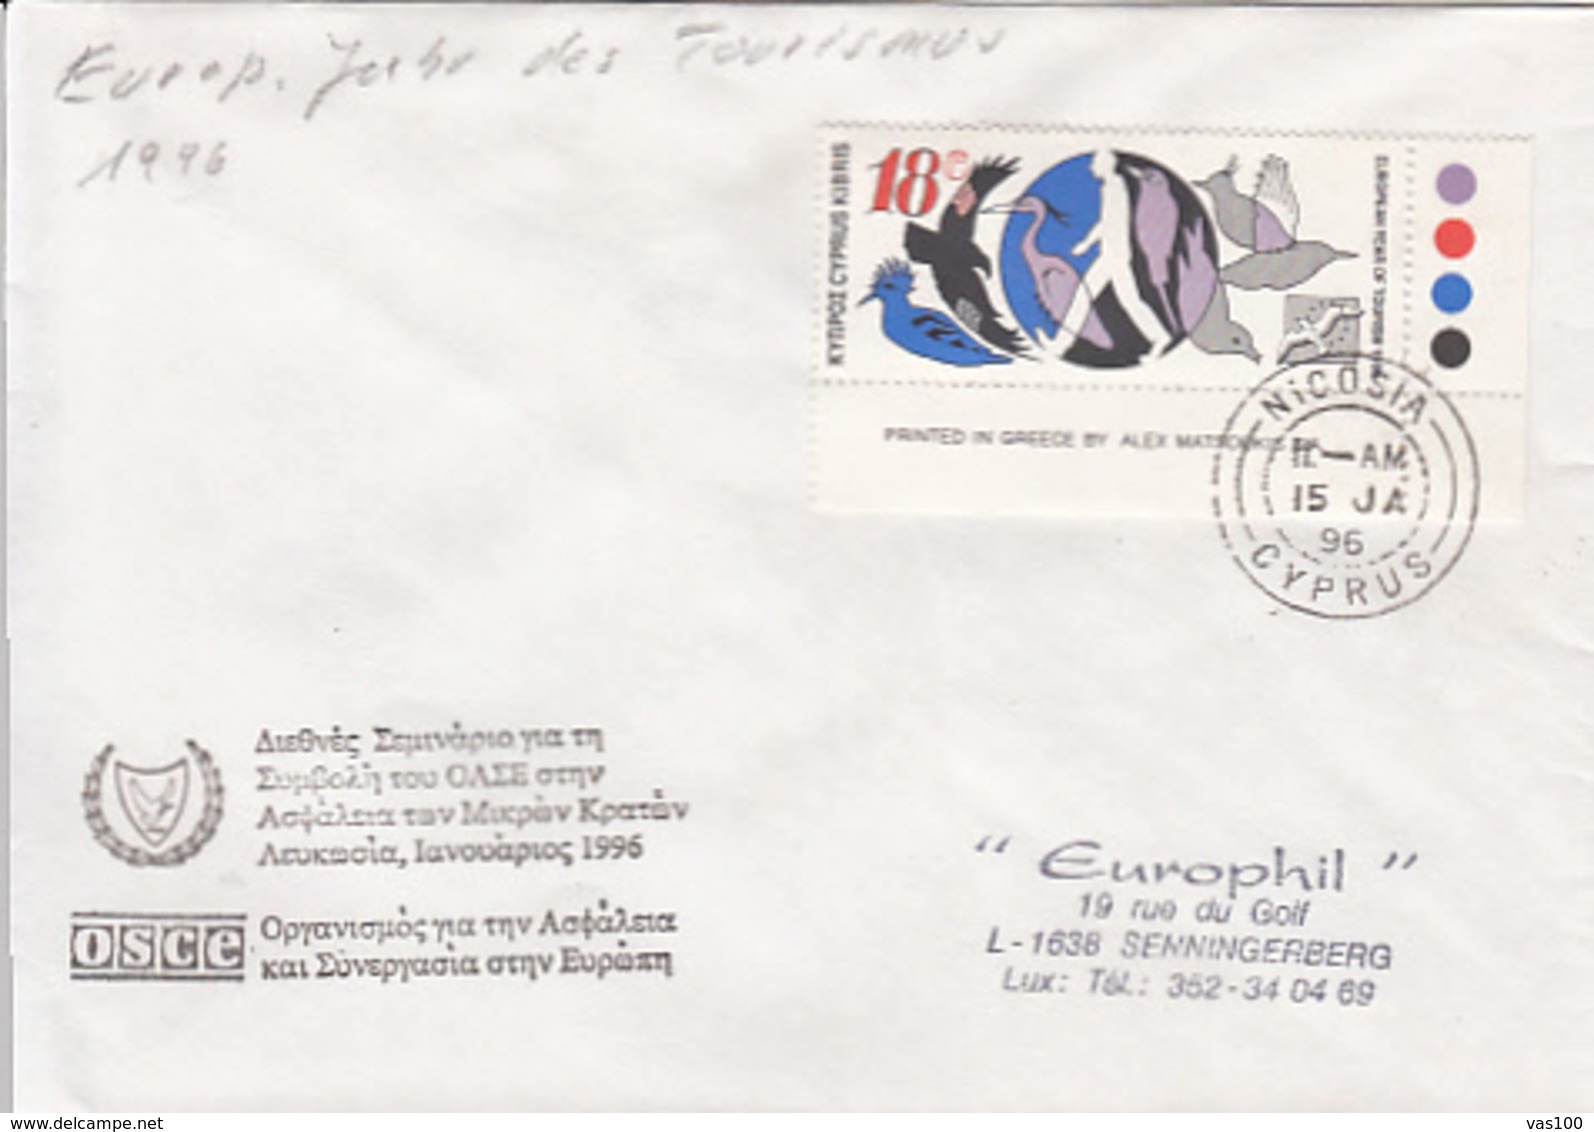 EUROPEAN YEAR OF TOURISM STAMP ON COVER, 1996, CYPRUS - Briefe U. Dokumente